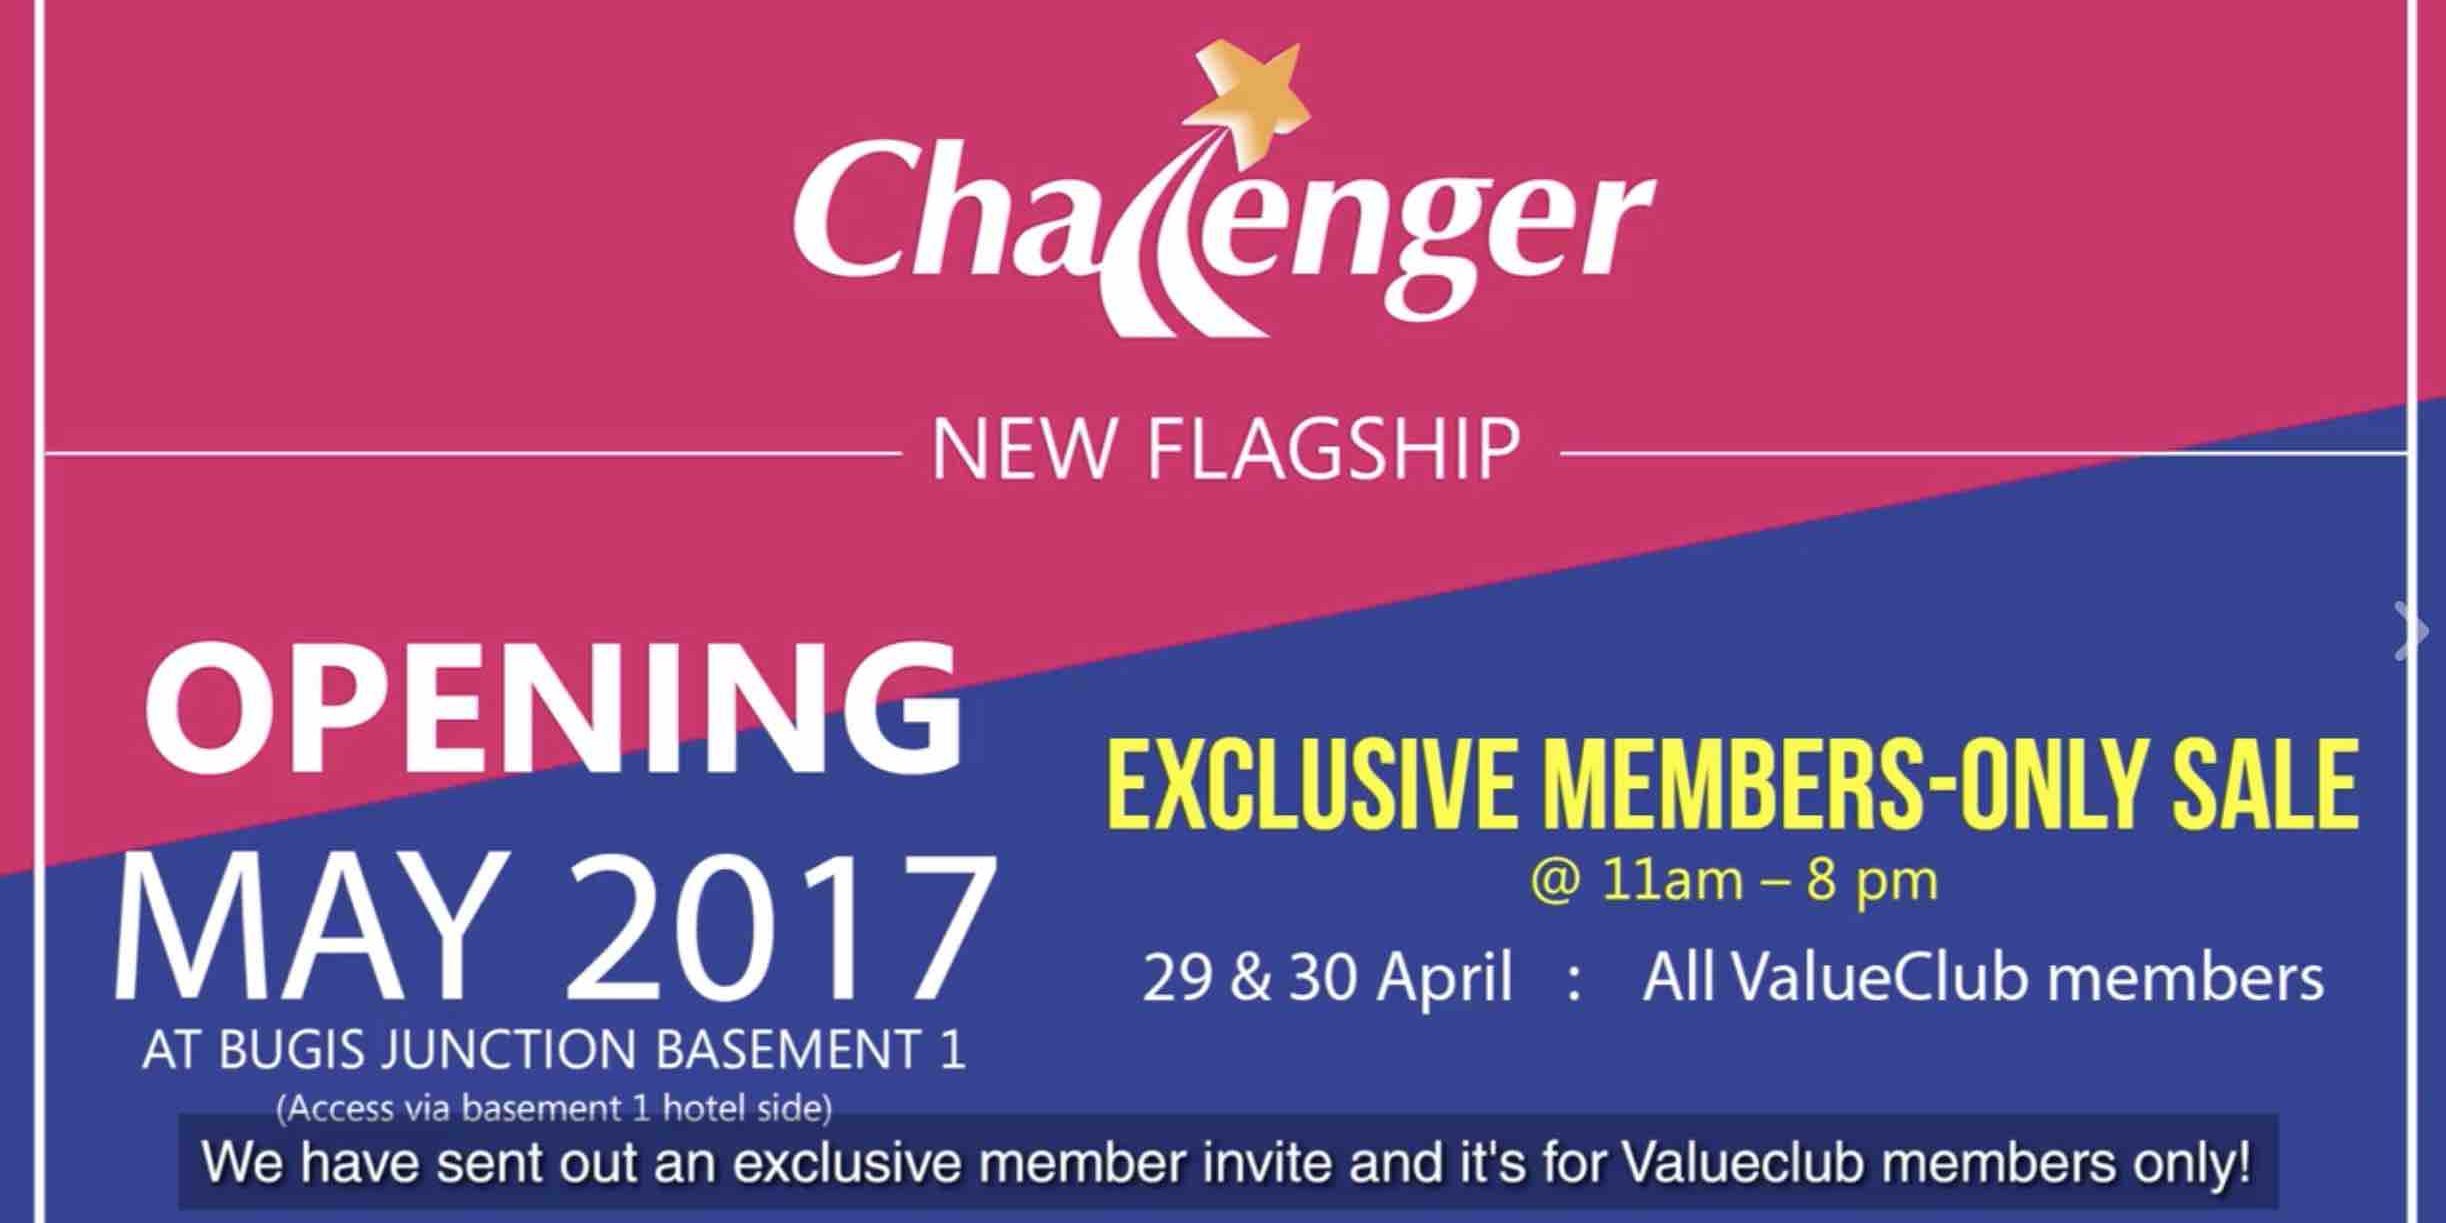 Challenger Singapore Exclusive Members-Only Sale Up to 90% Off Promotion 29-30 Apr 2017